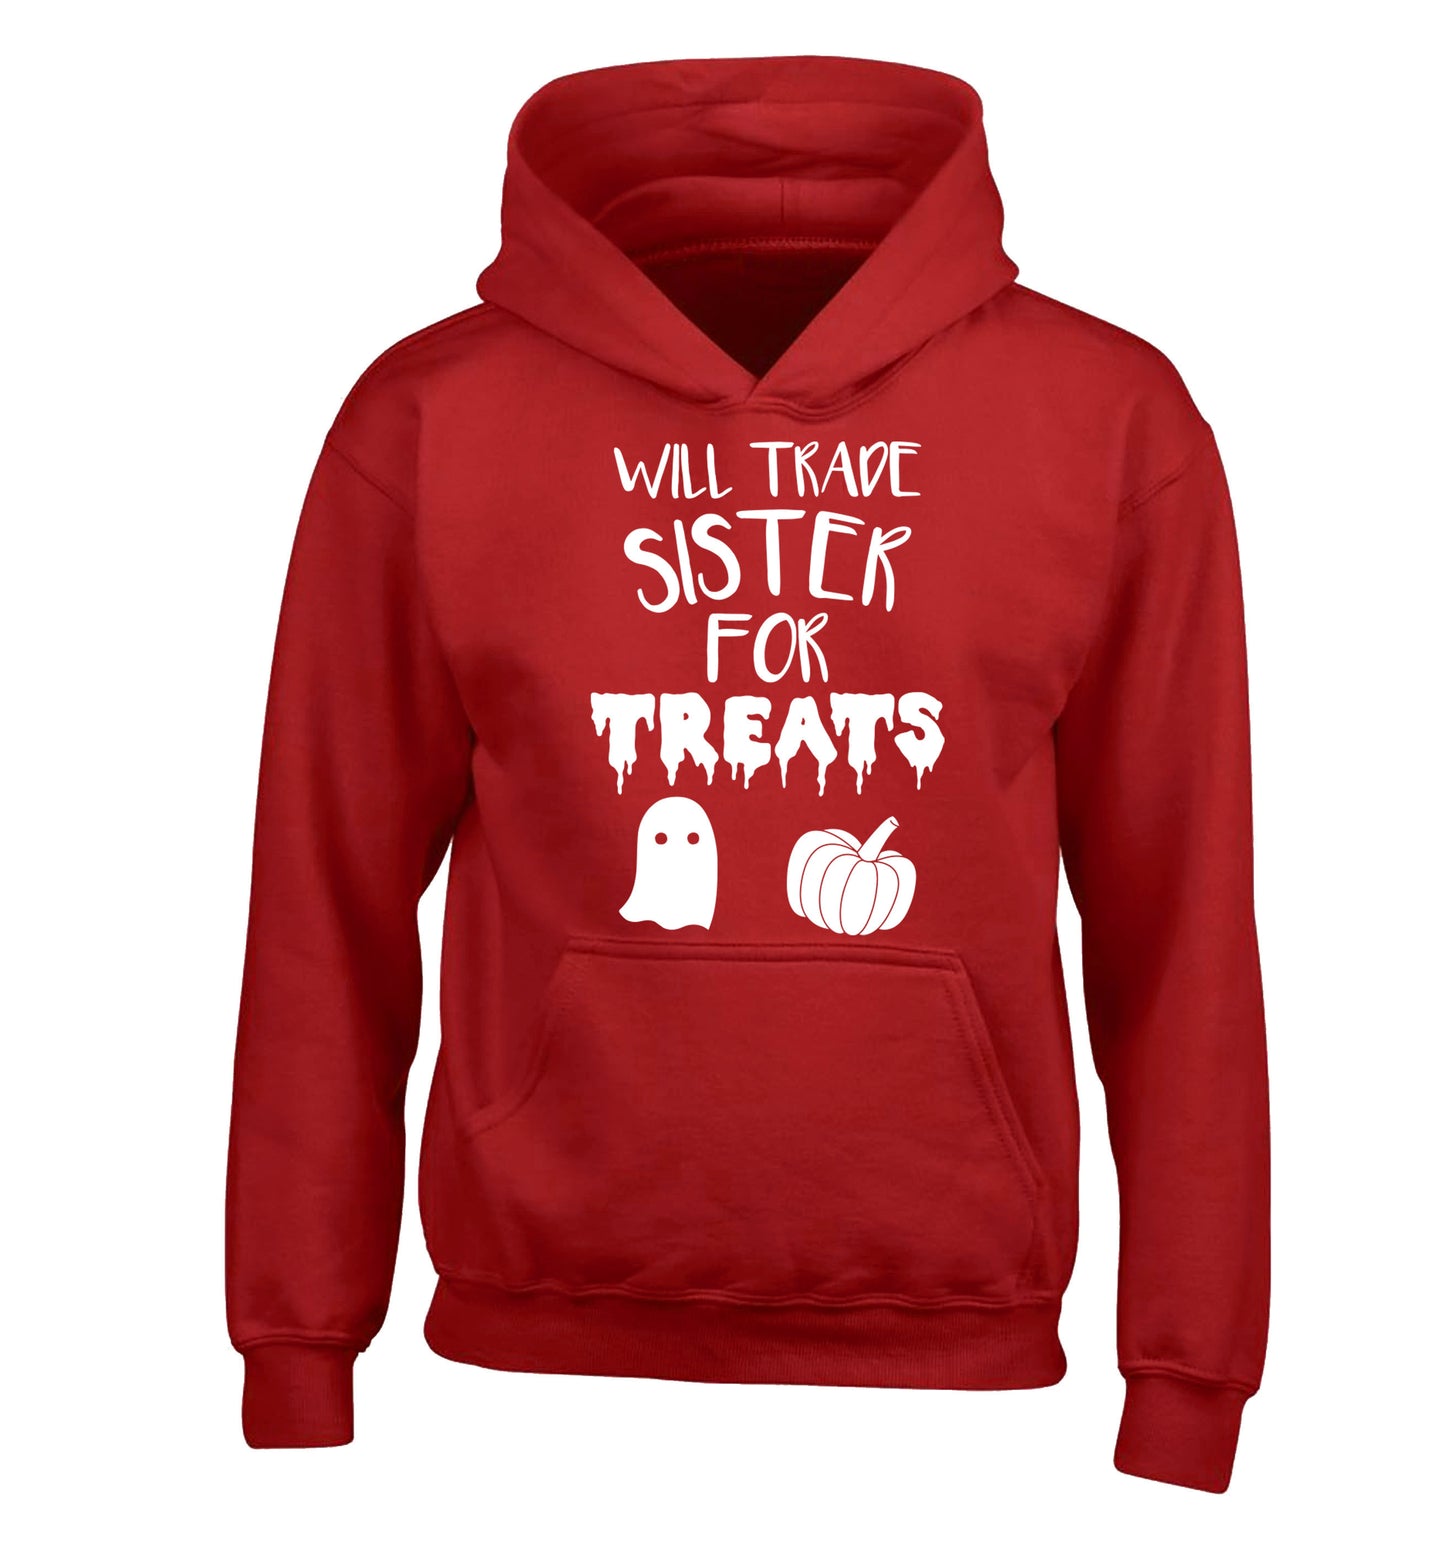 Will trade sister for treats children's red hoodie 12-14 Years